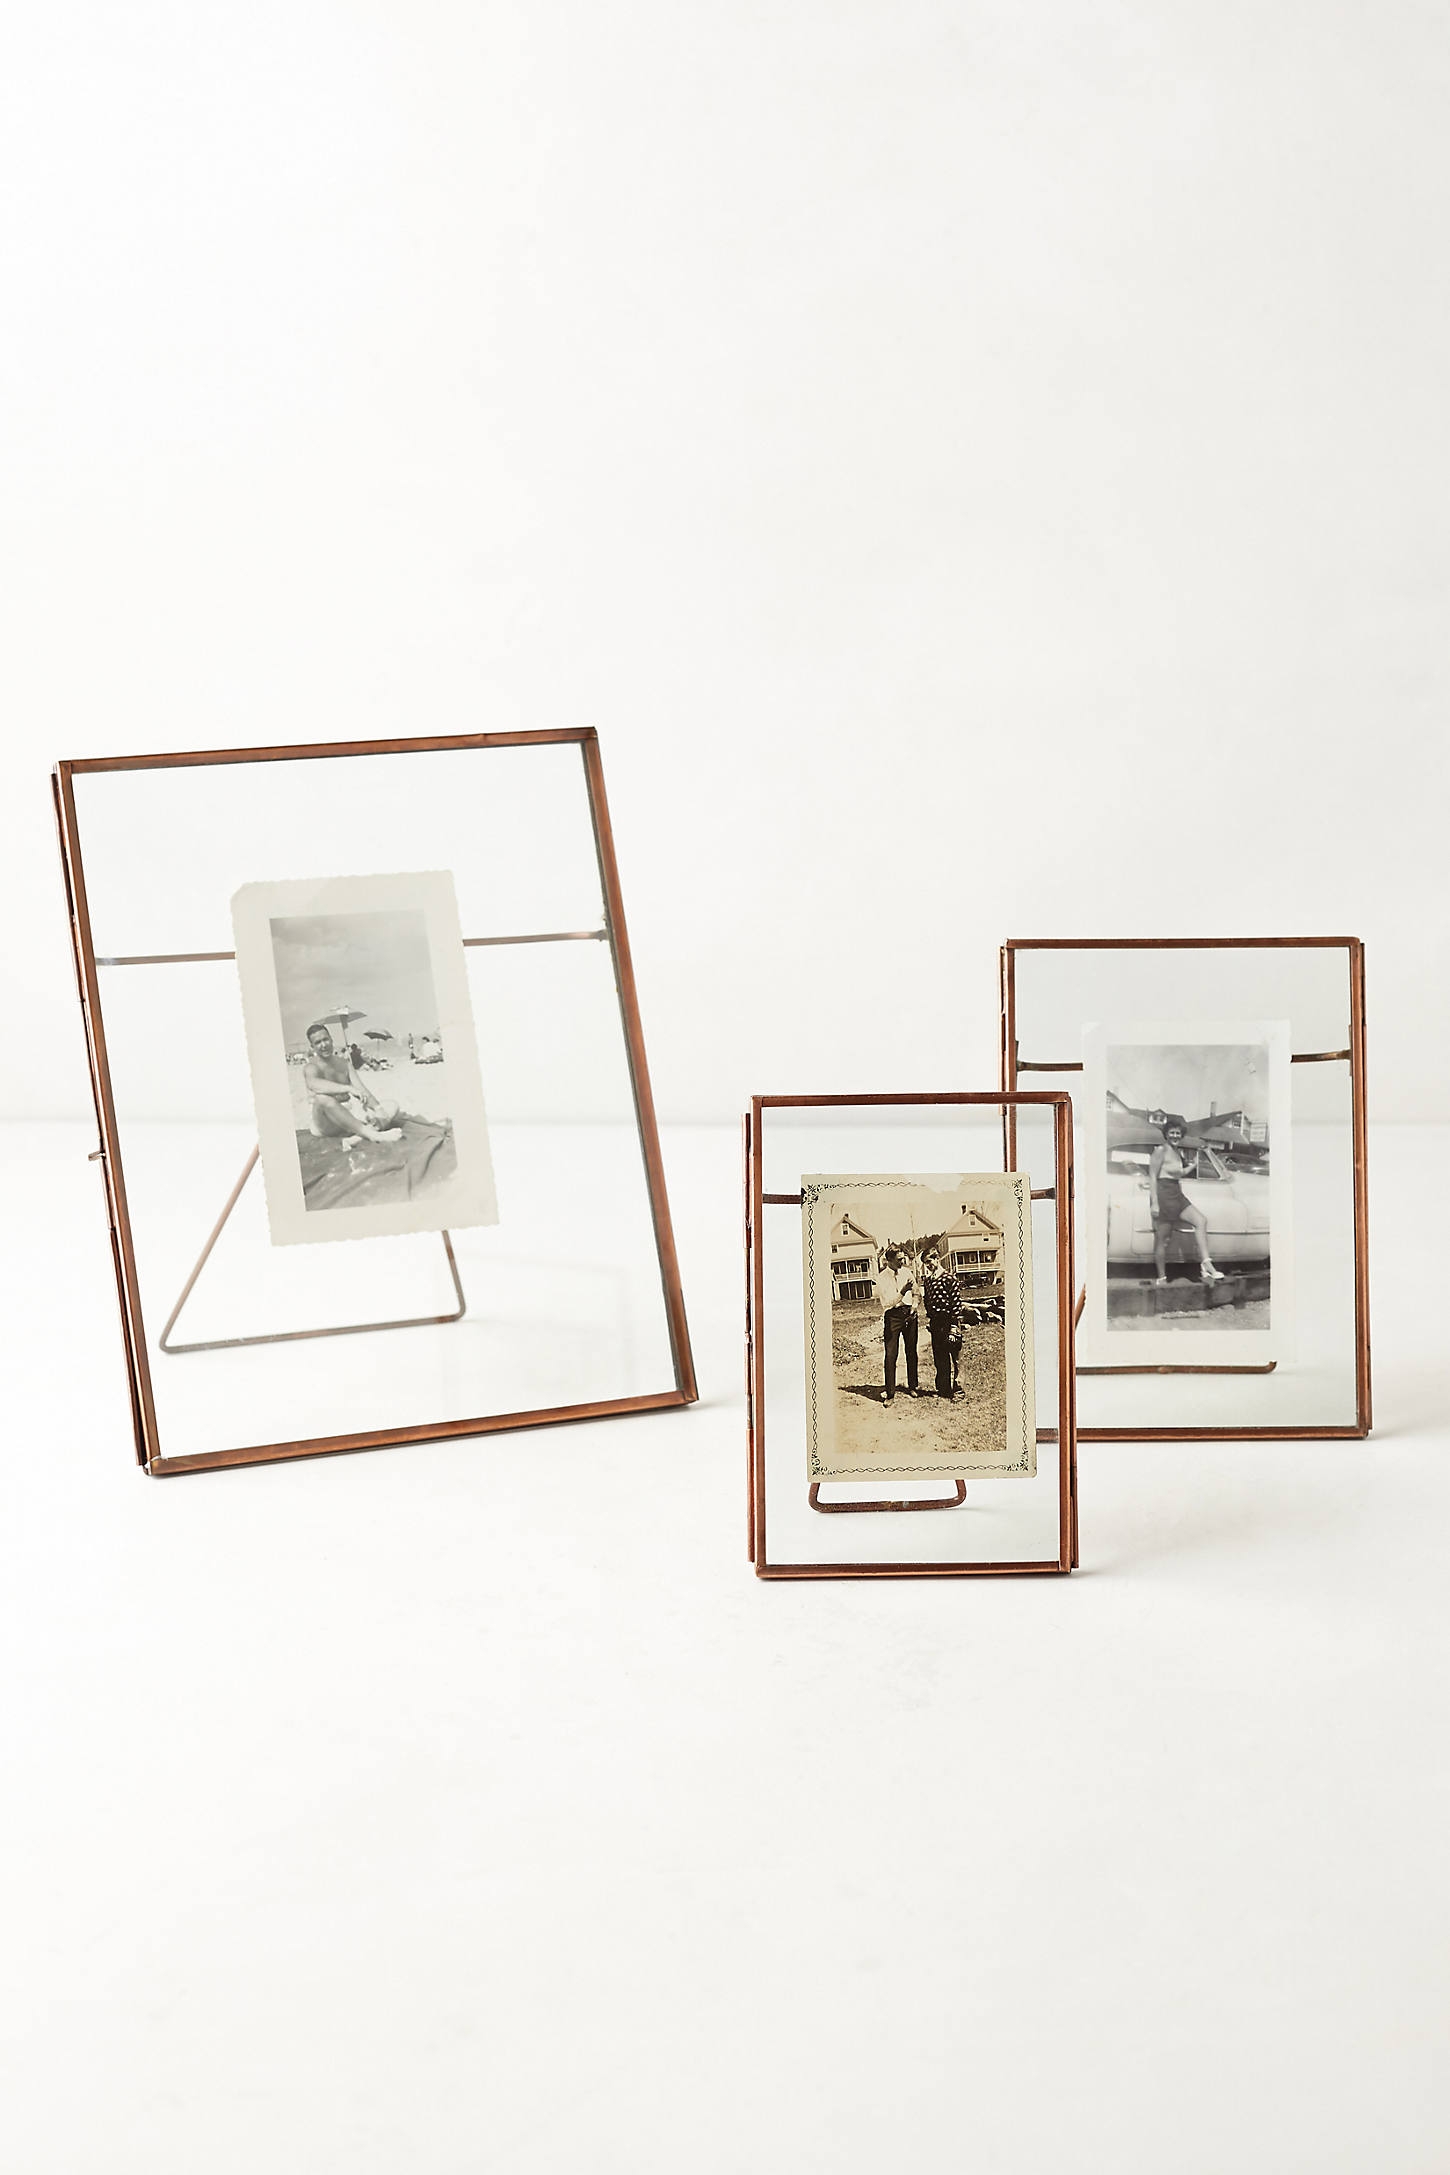 Pressed Glass Photo Frame By Anthropologie in Brown Size 8 X 10 - Image 0